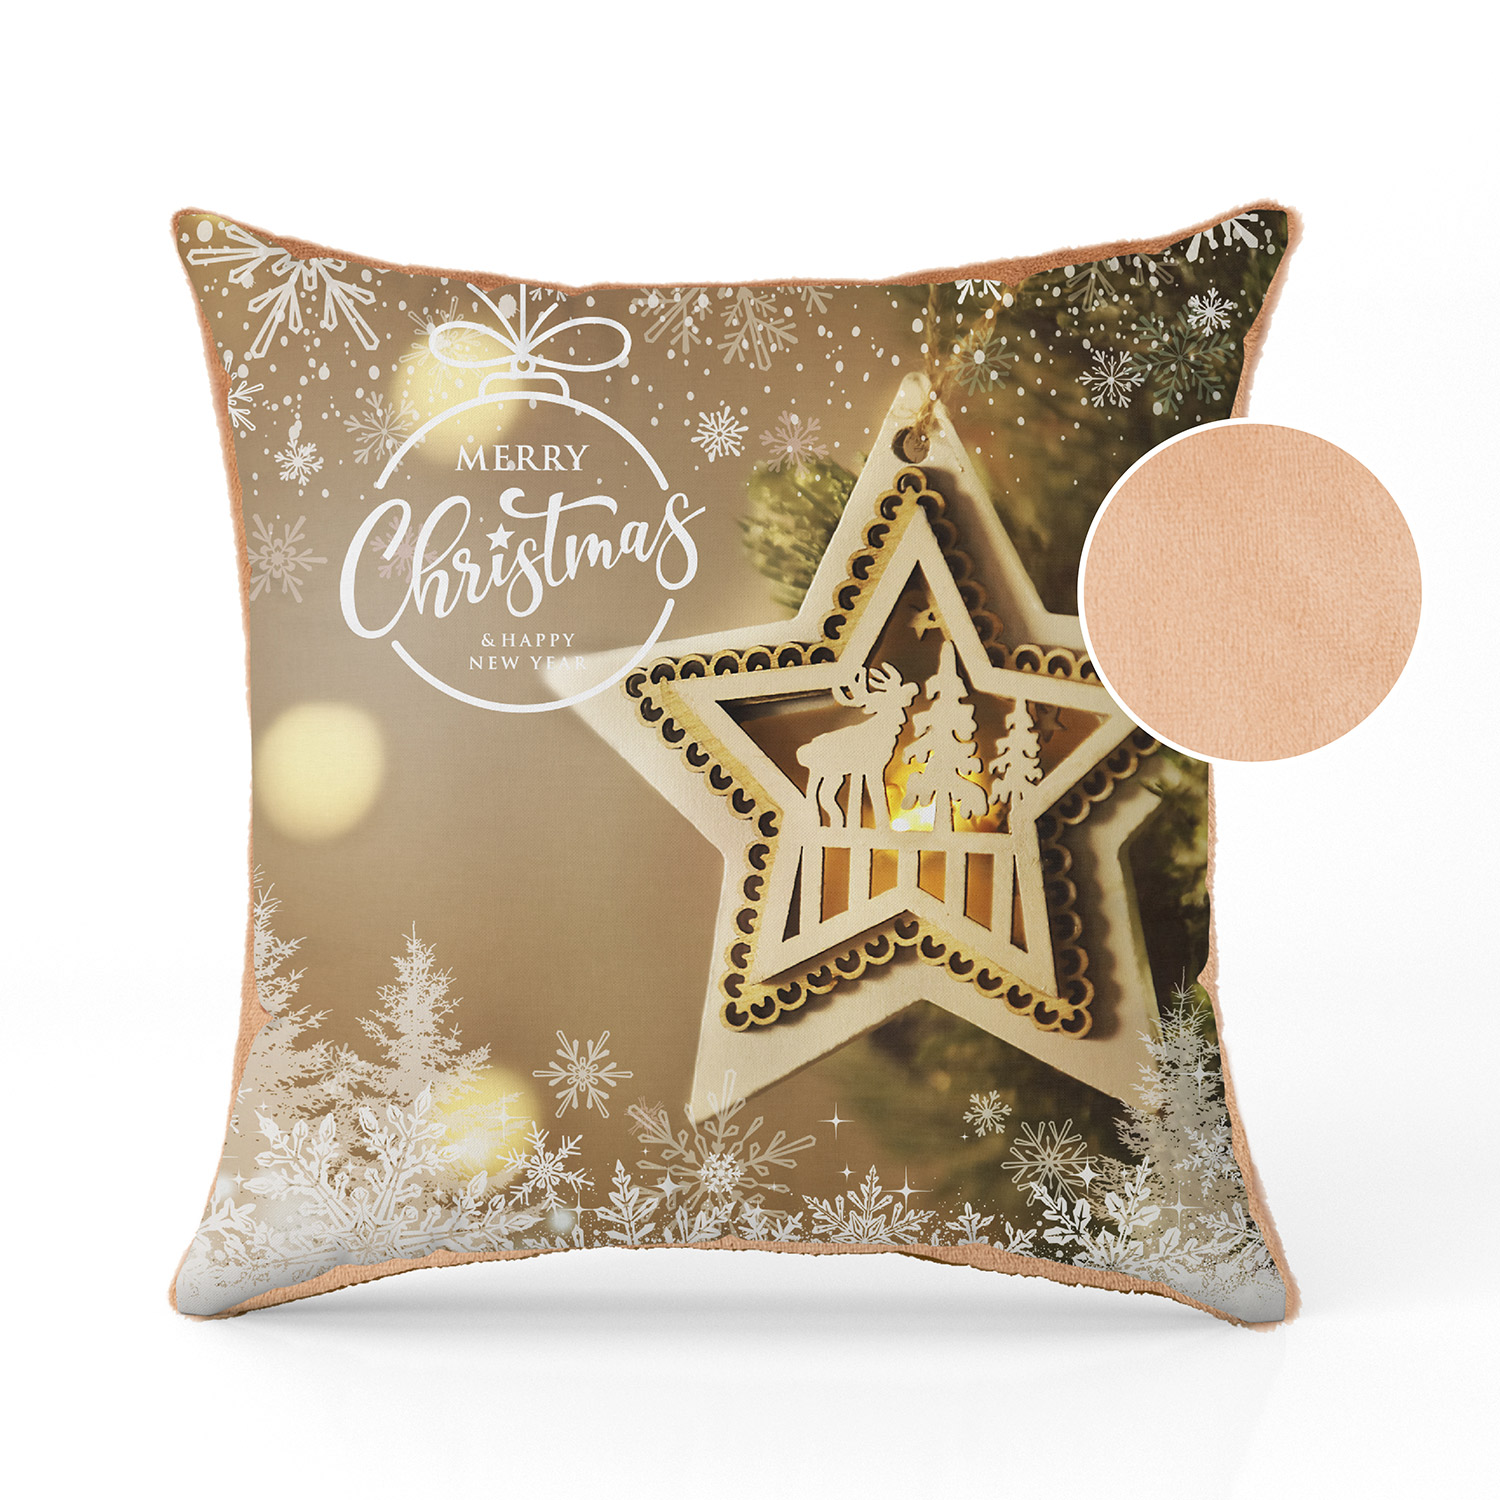 Christmas pillow with a star